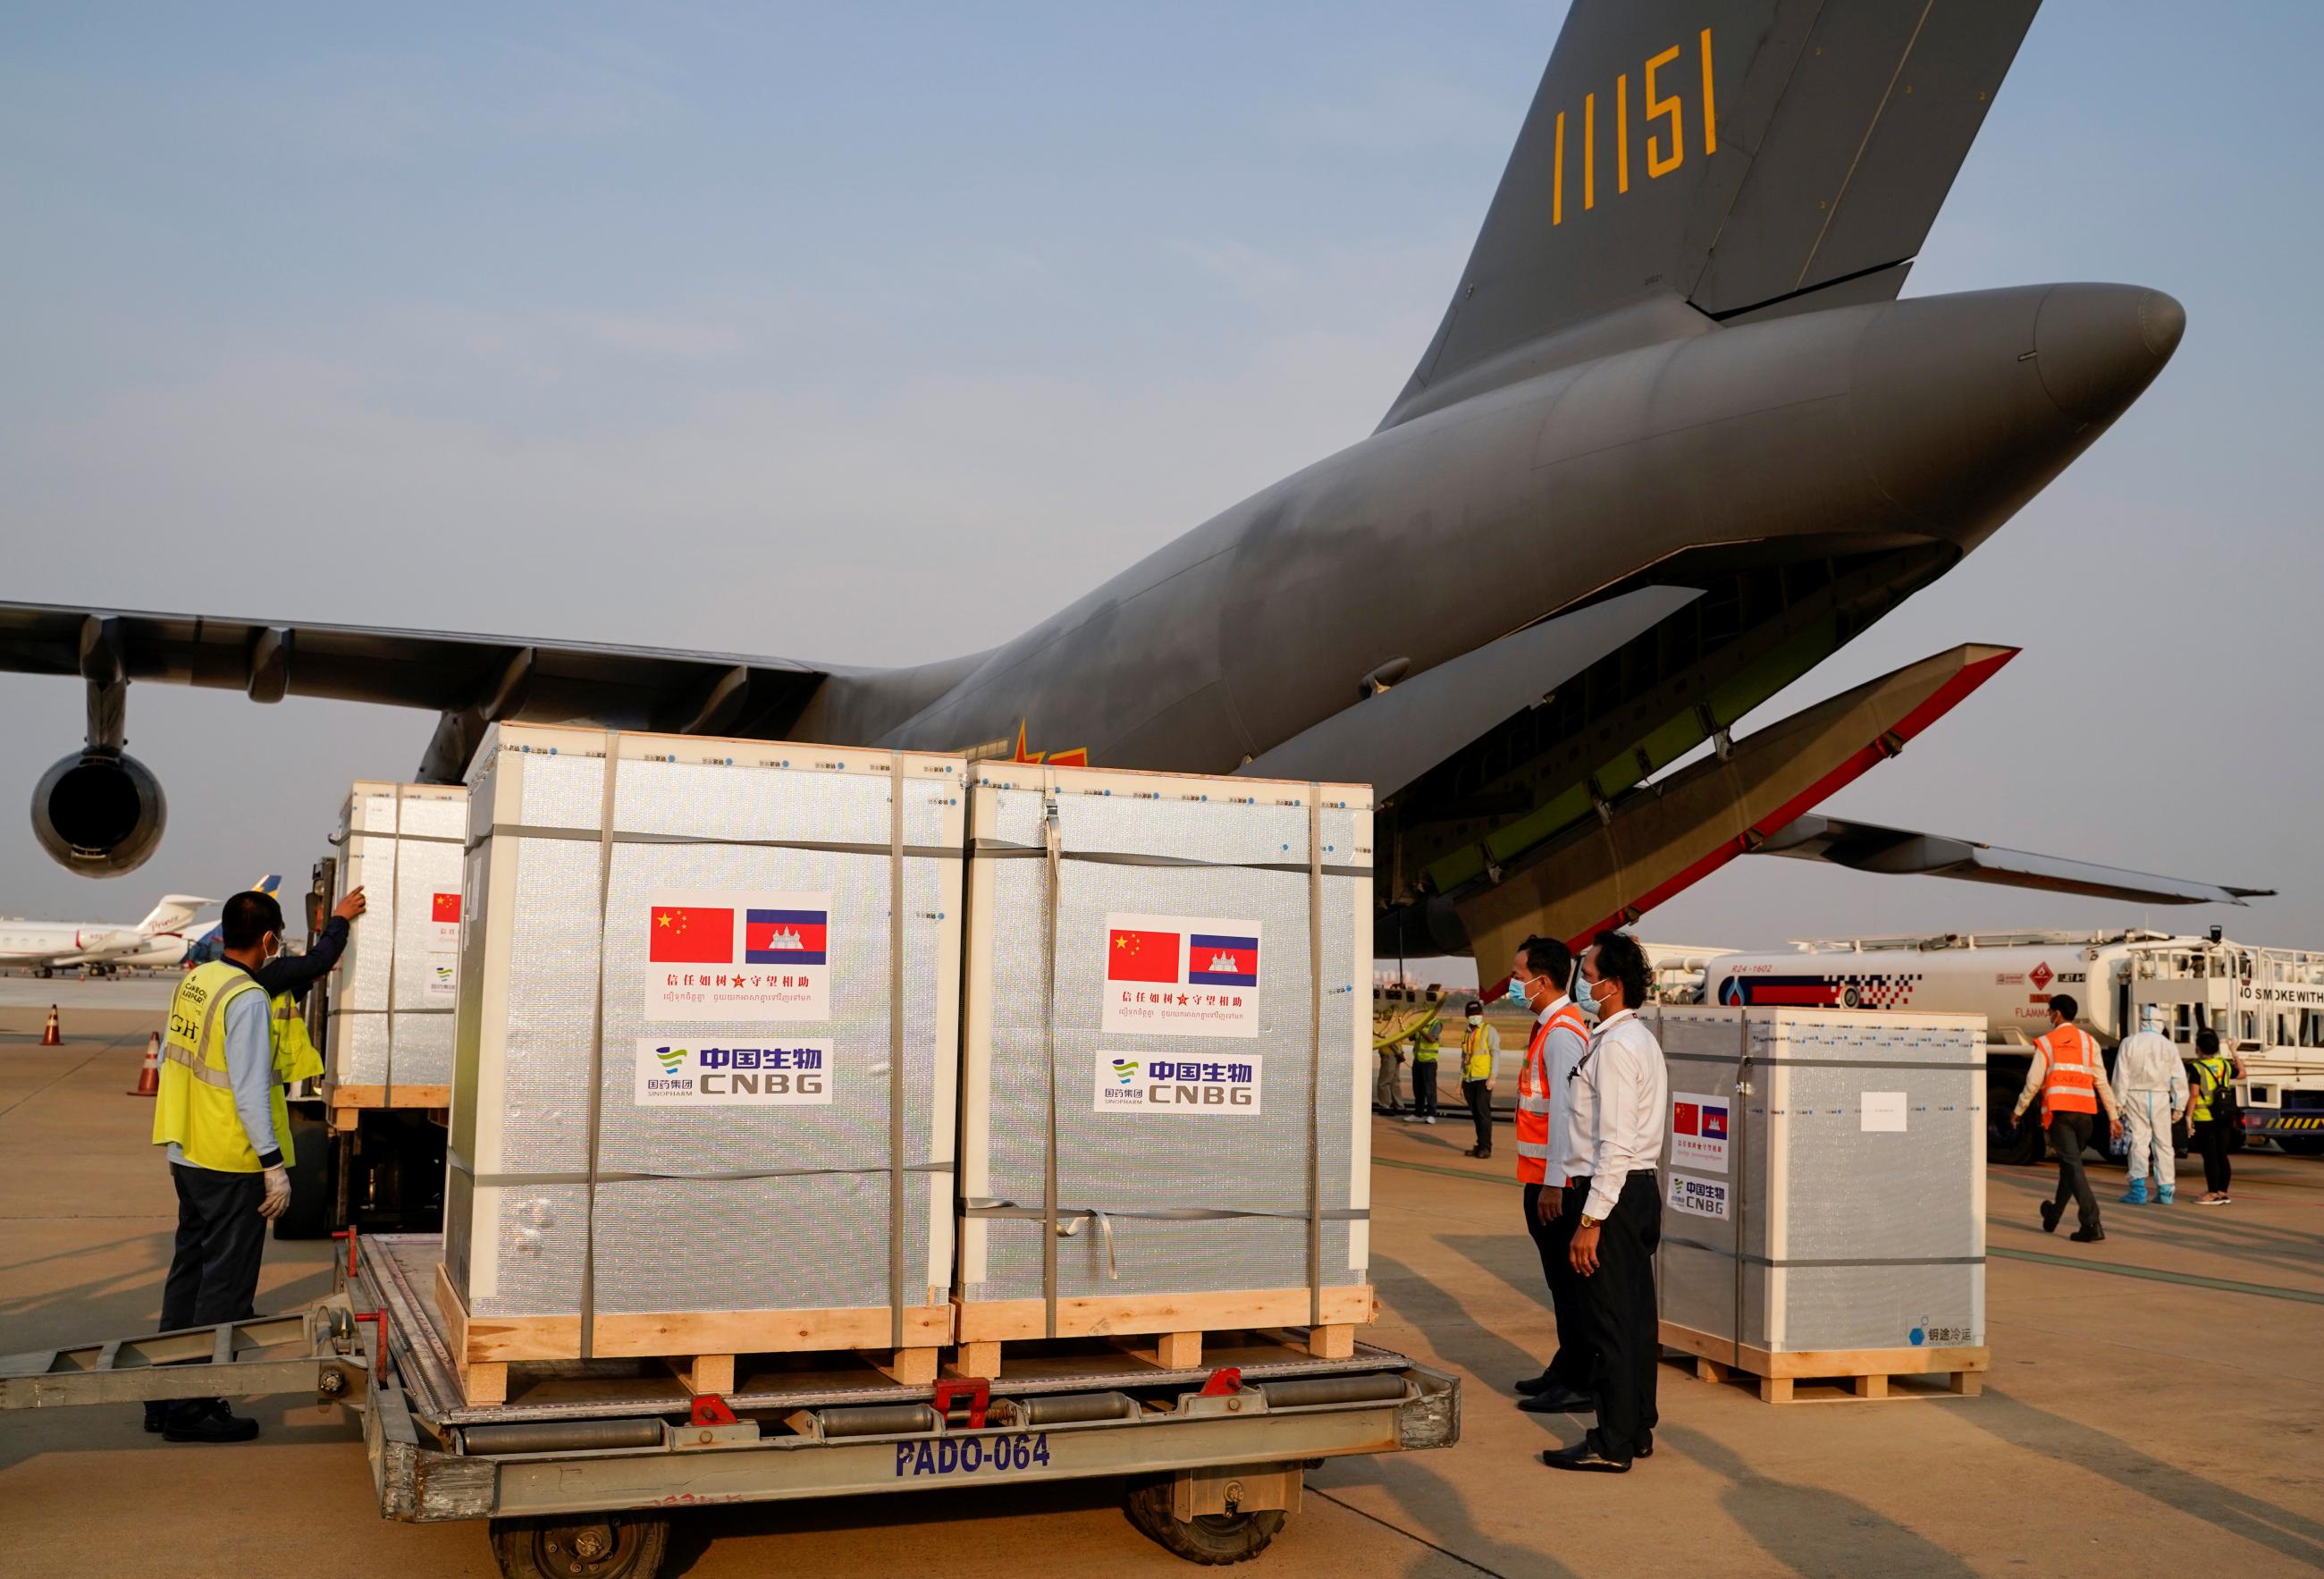 Workers stand next to the shipment of 600,000 doses of coronavirus disease (COVID-19) vaccines donated by China, at Phnom Penh International Airport, in Phnom Penh, Cambodia on February 7, 2021